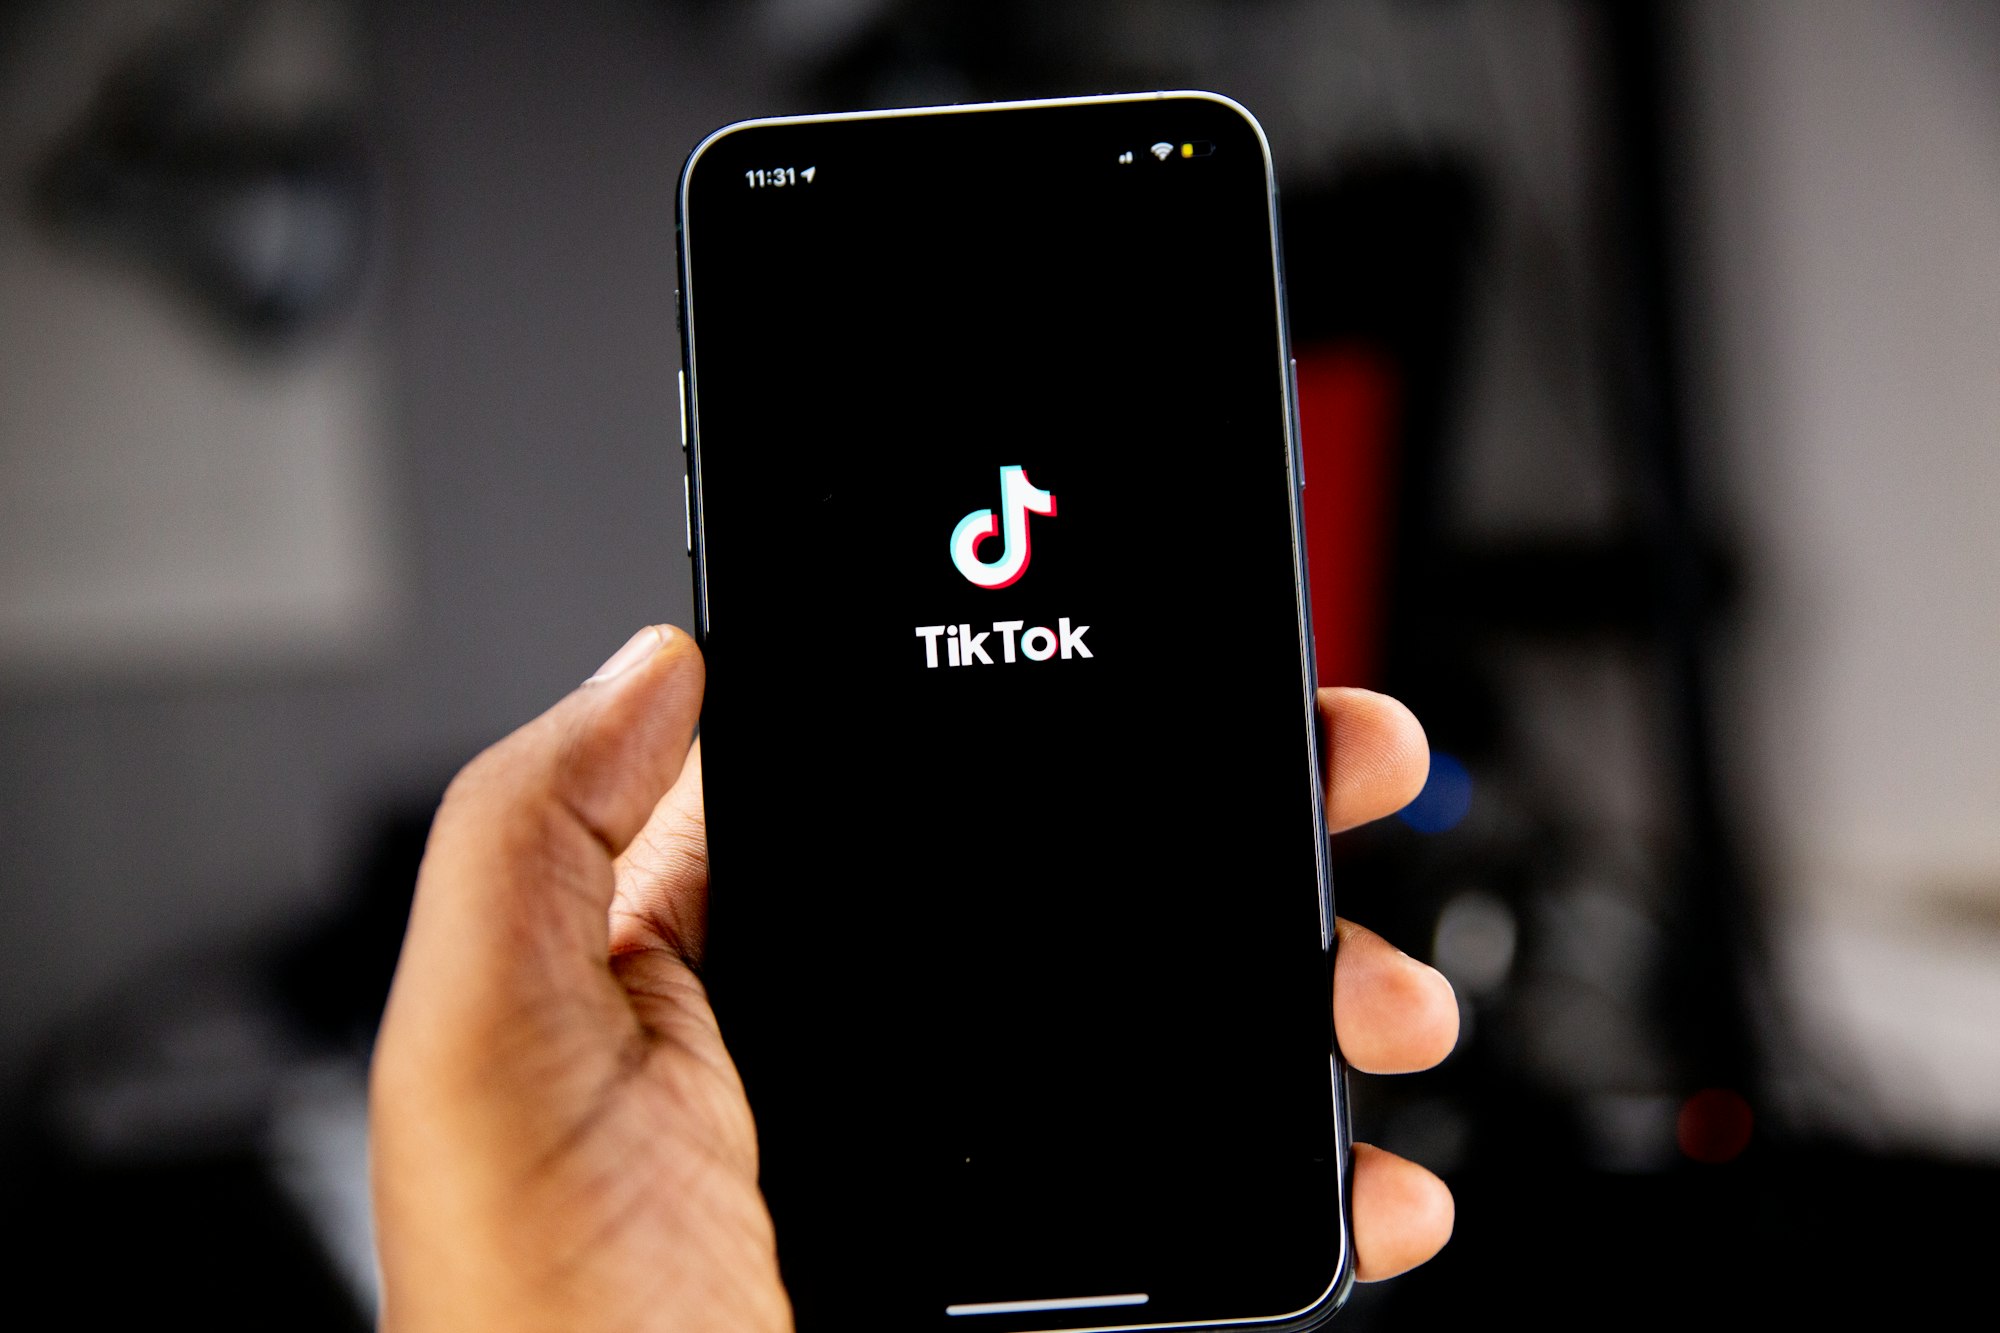 TikTok is testing 15-minute video uploads, as it looks to rival YouTube